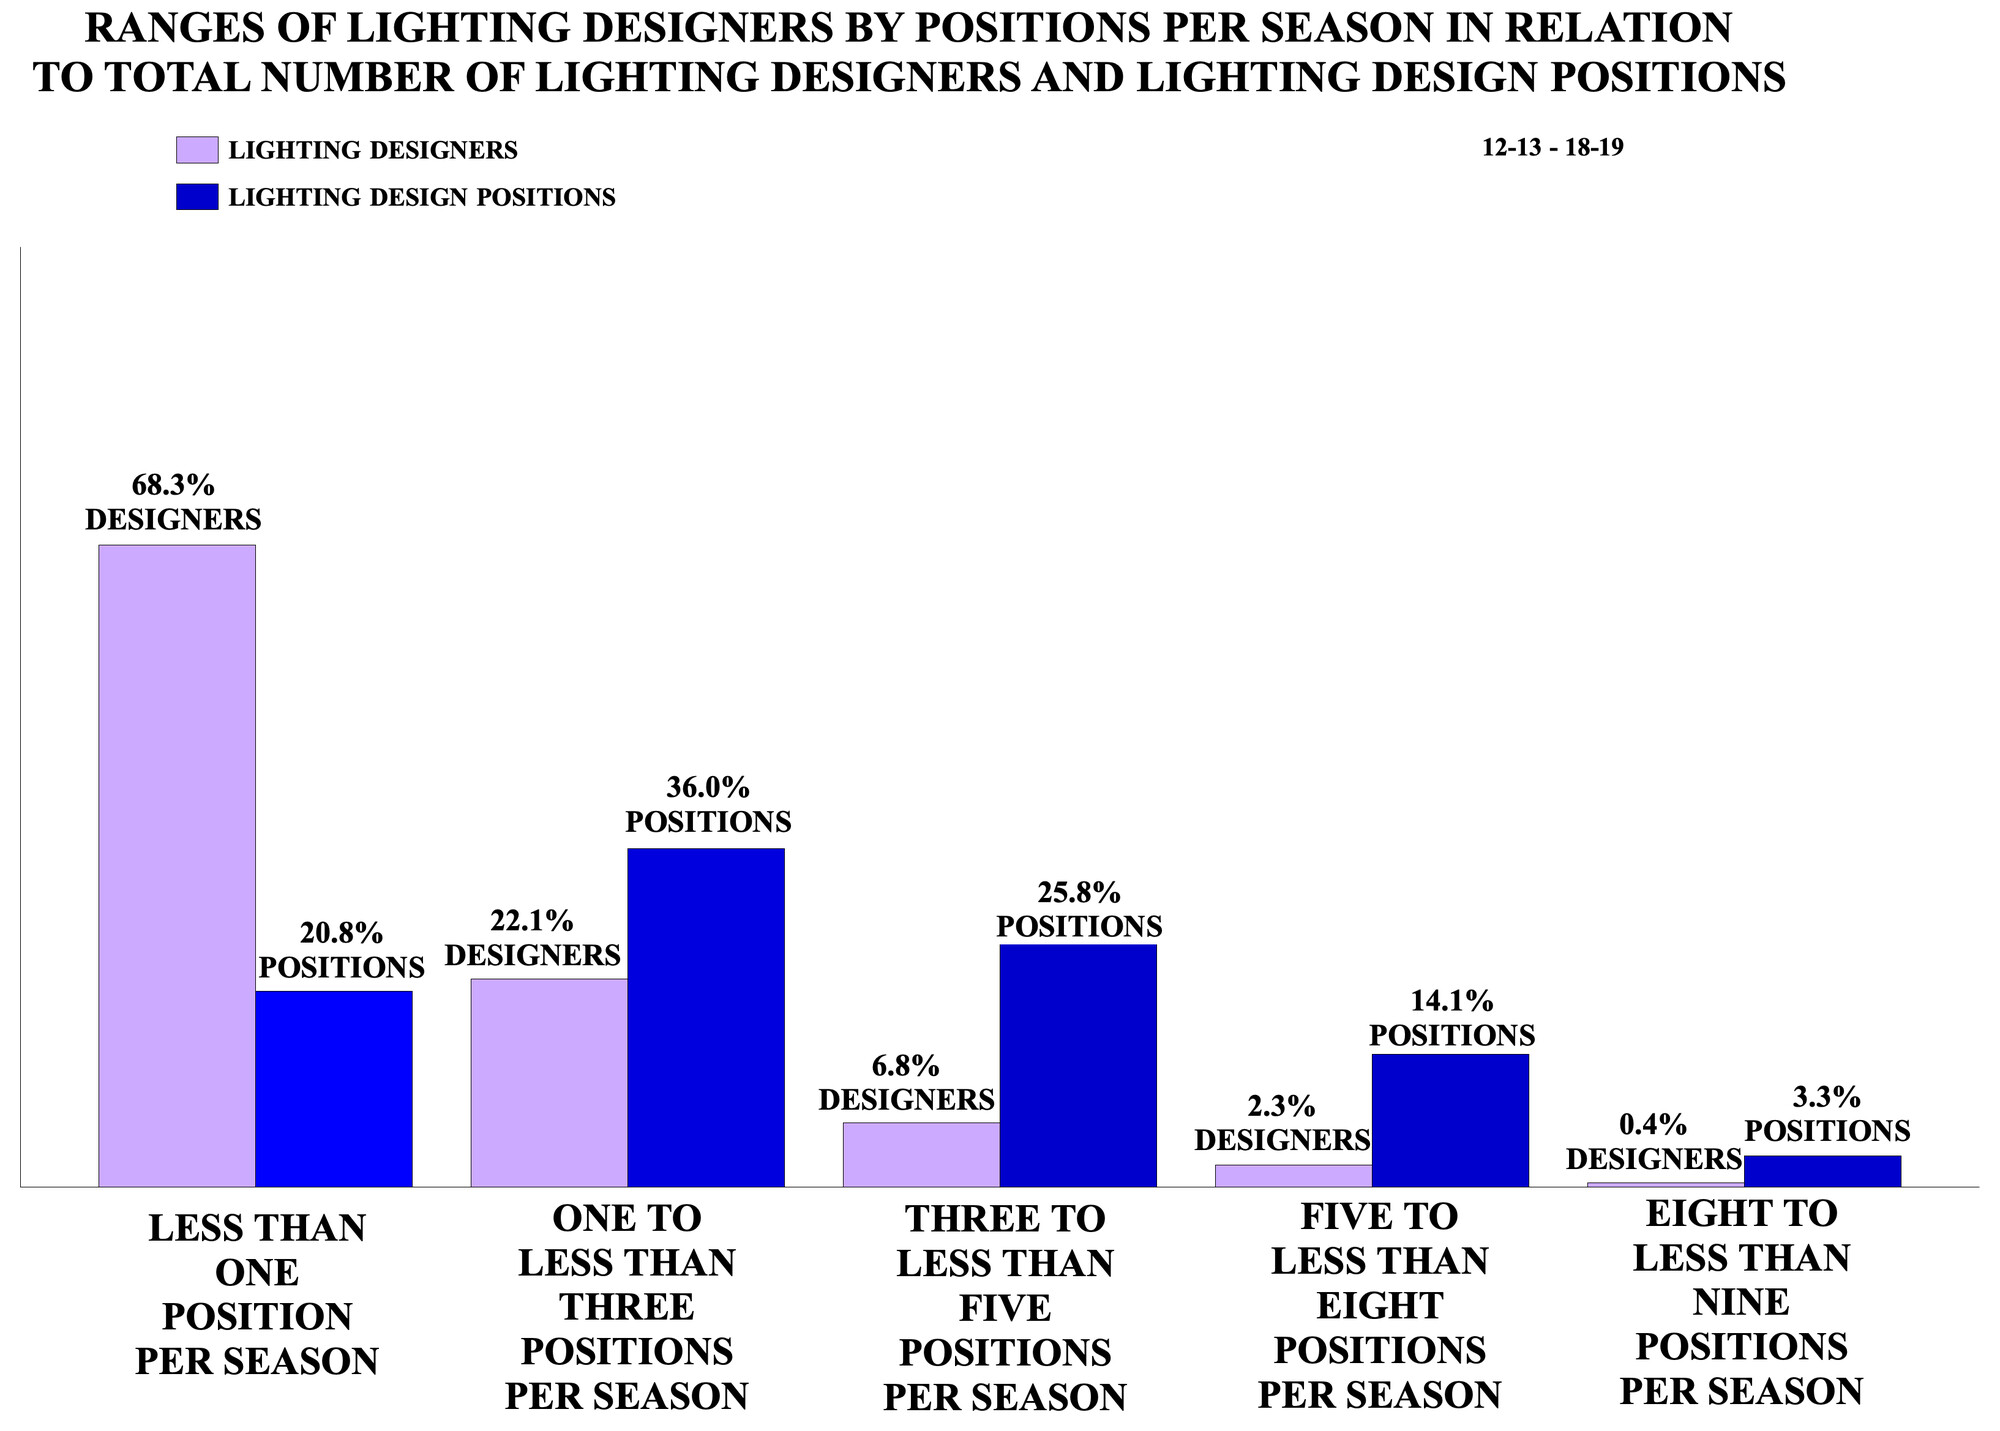 Ranges of Lighting Designers by Positions Per Season in Relation to Total Number of Lighting Designers and Lighting Design Positions